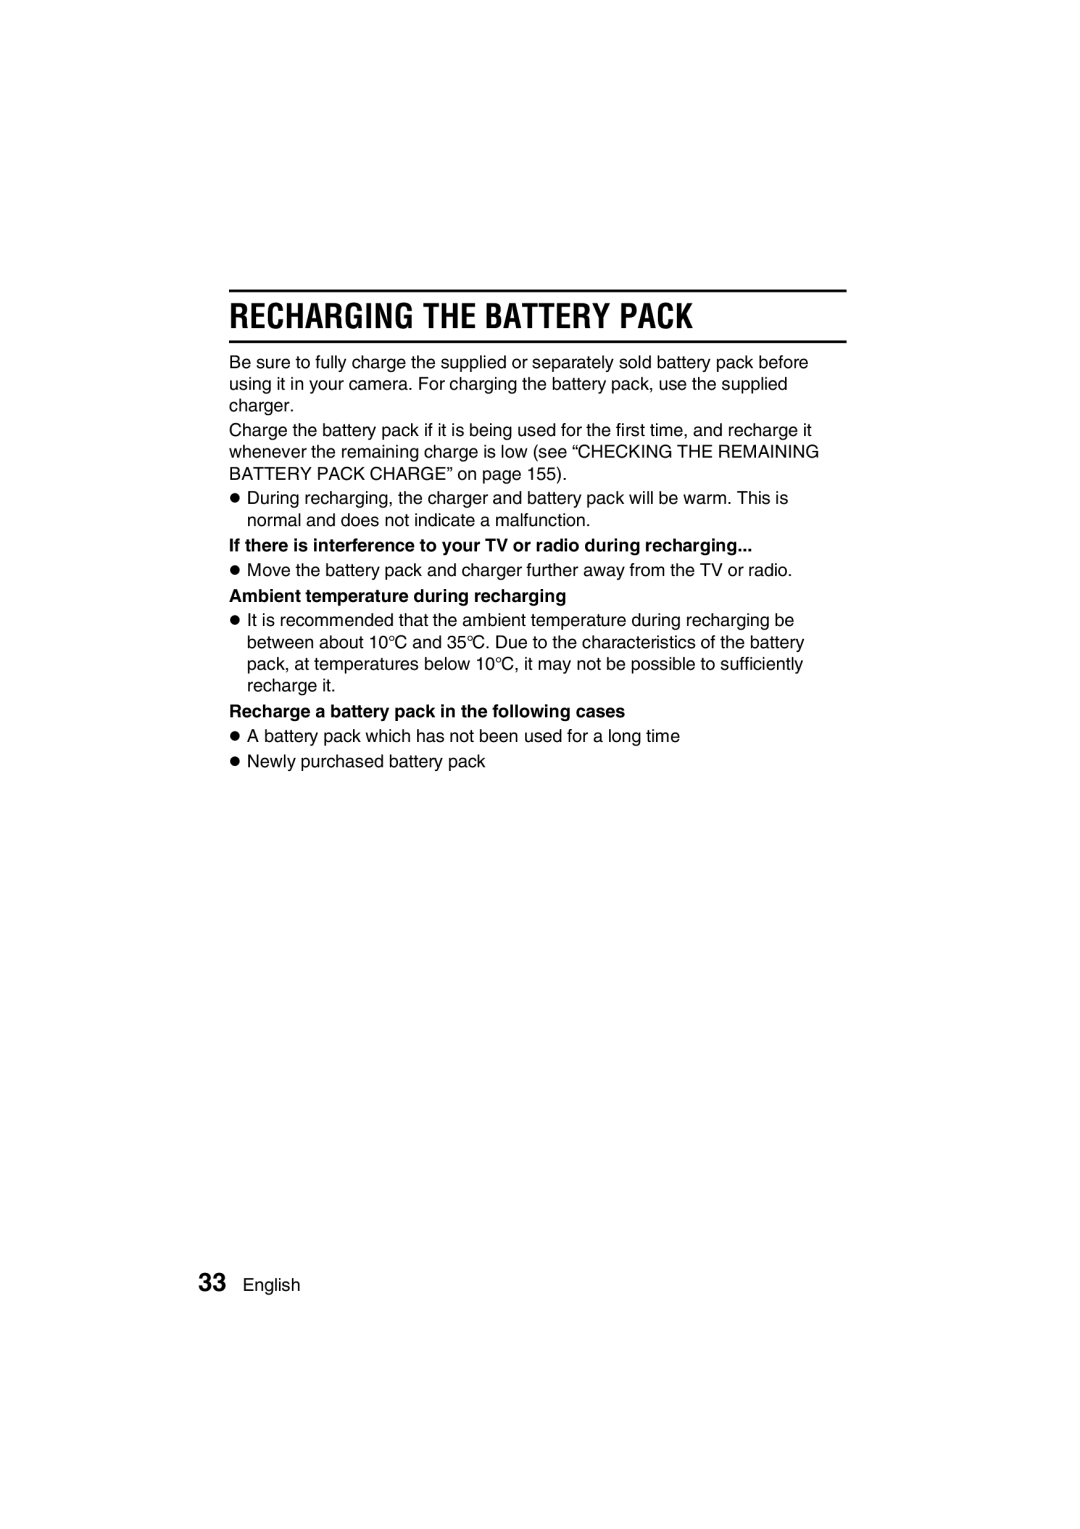 Sanyo VPC-J1EX instruction manual Recharging the Battery Pack, Ambient temperature during recharging 